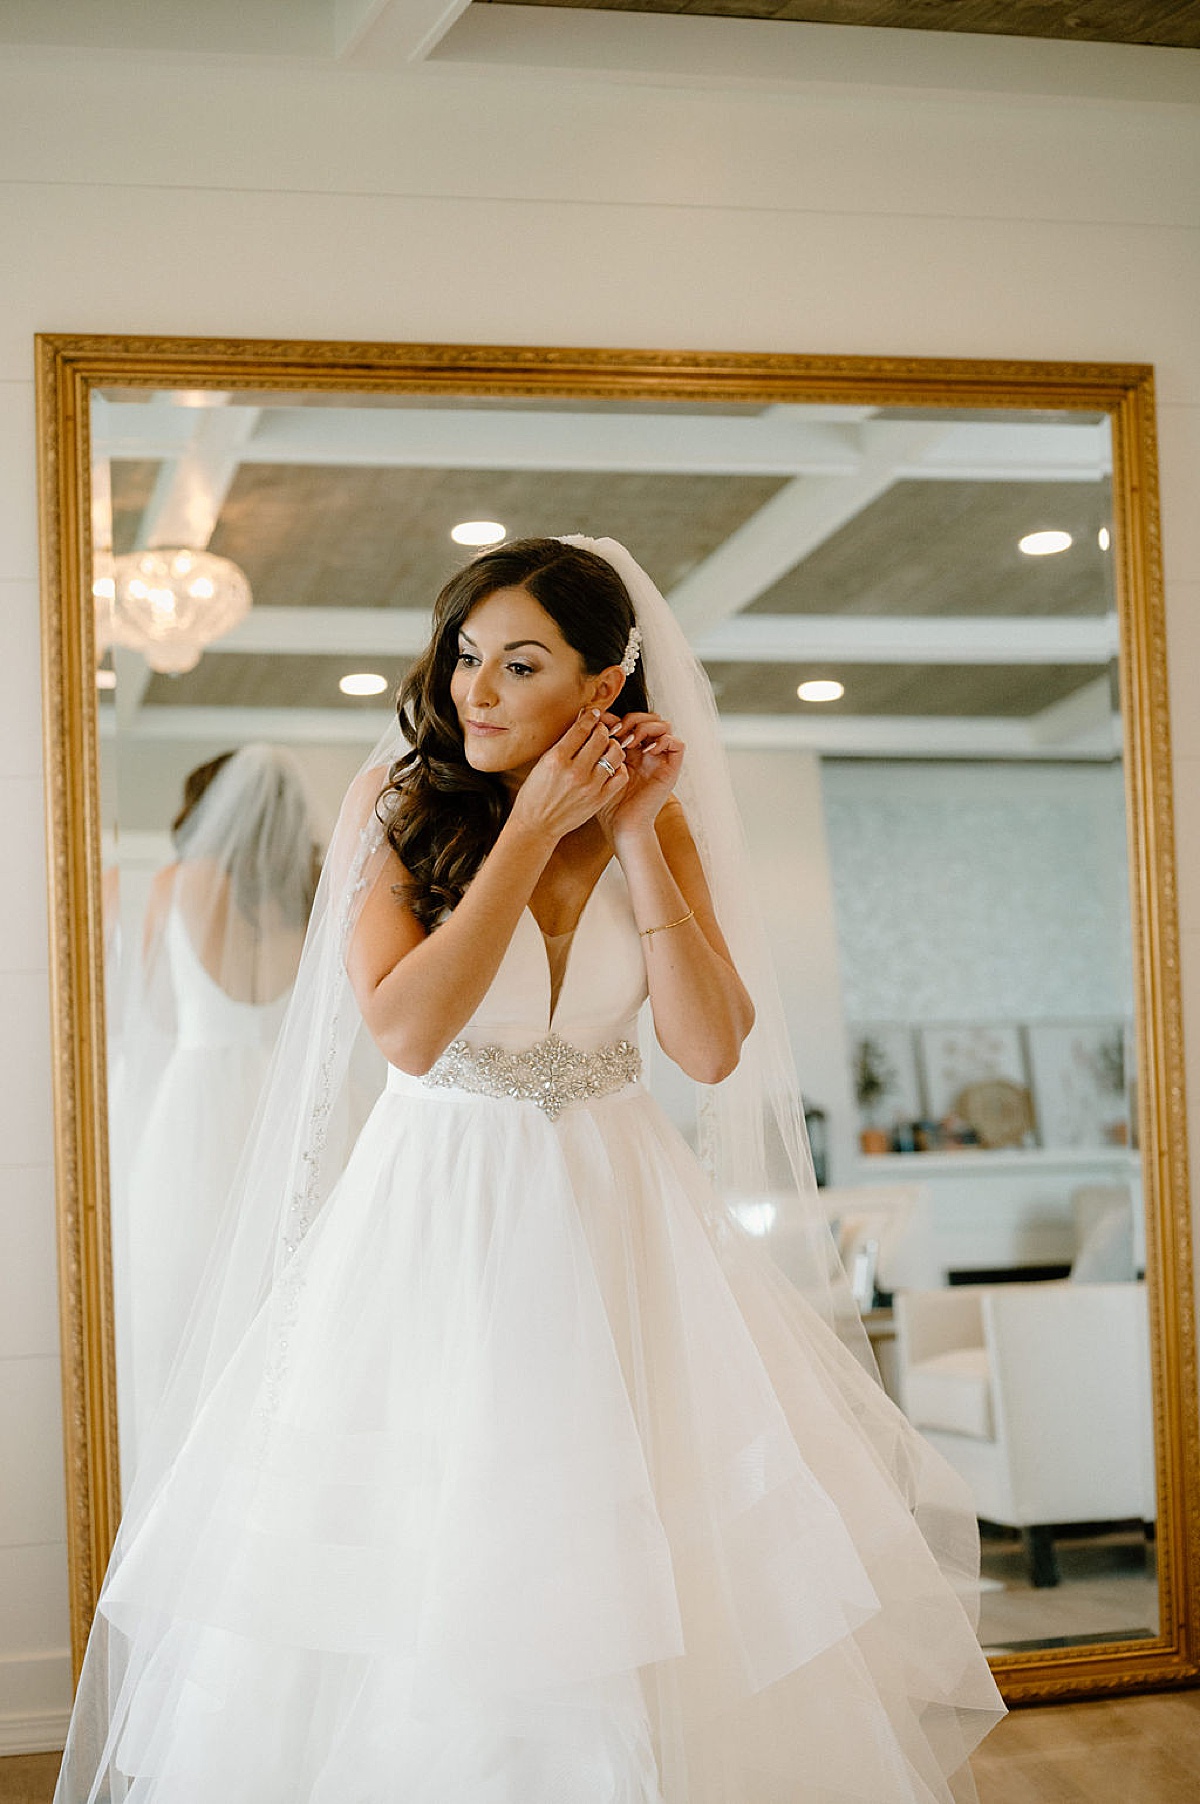 bride in tulle gown with diamond belt fastens earring while getting ready before romantic Etre Farms summer wedding